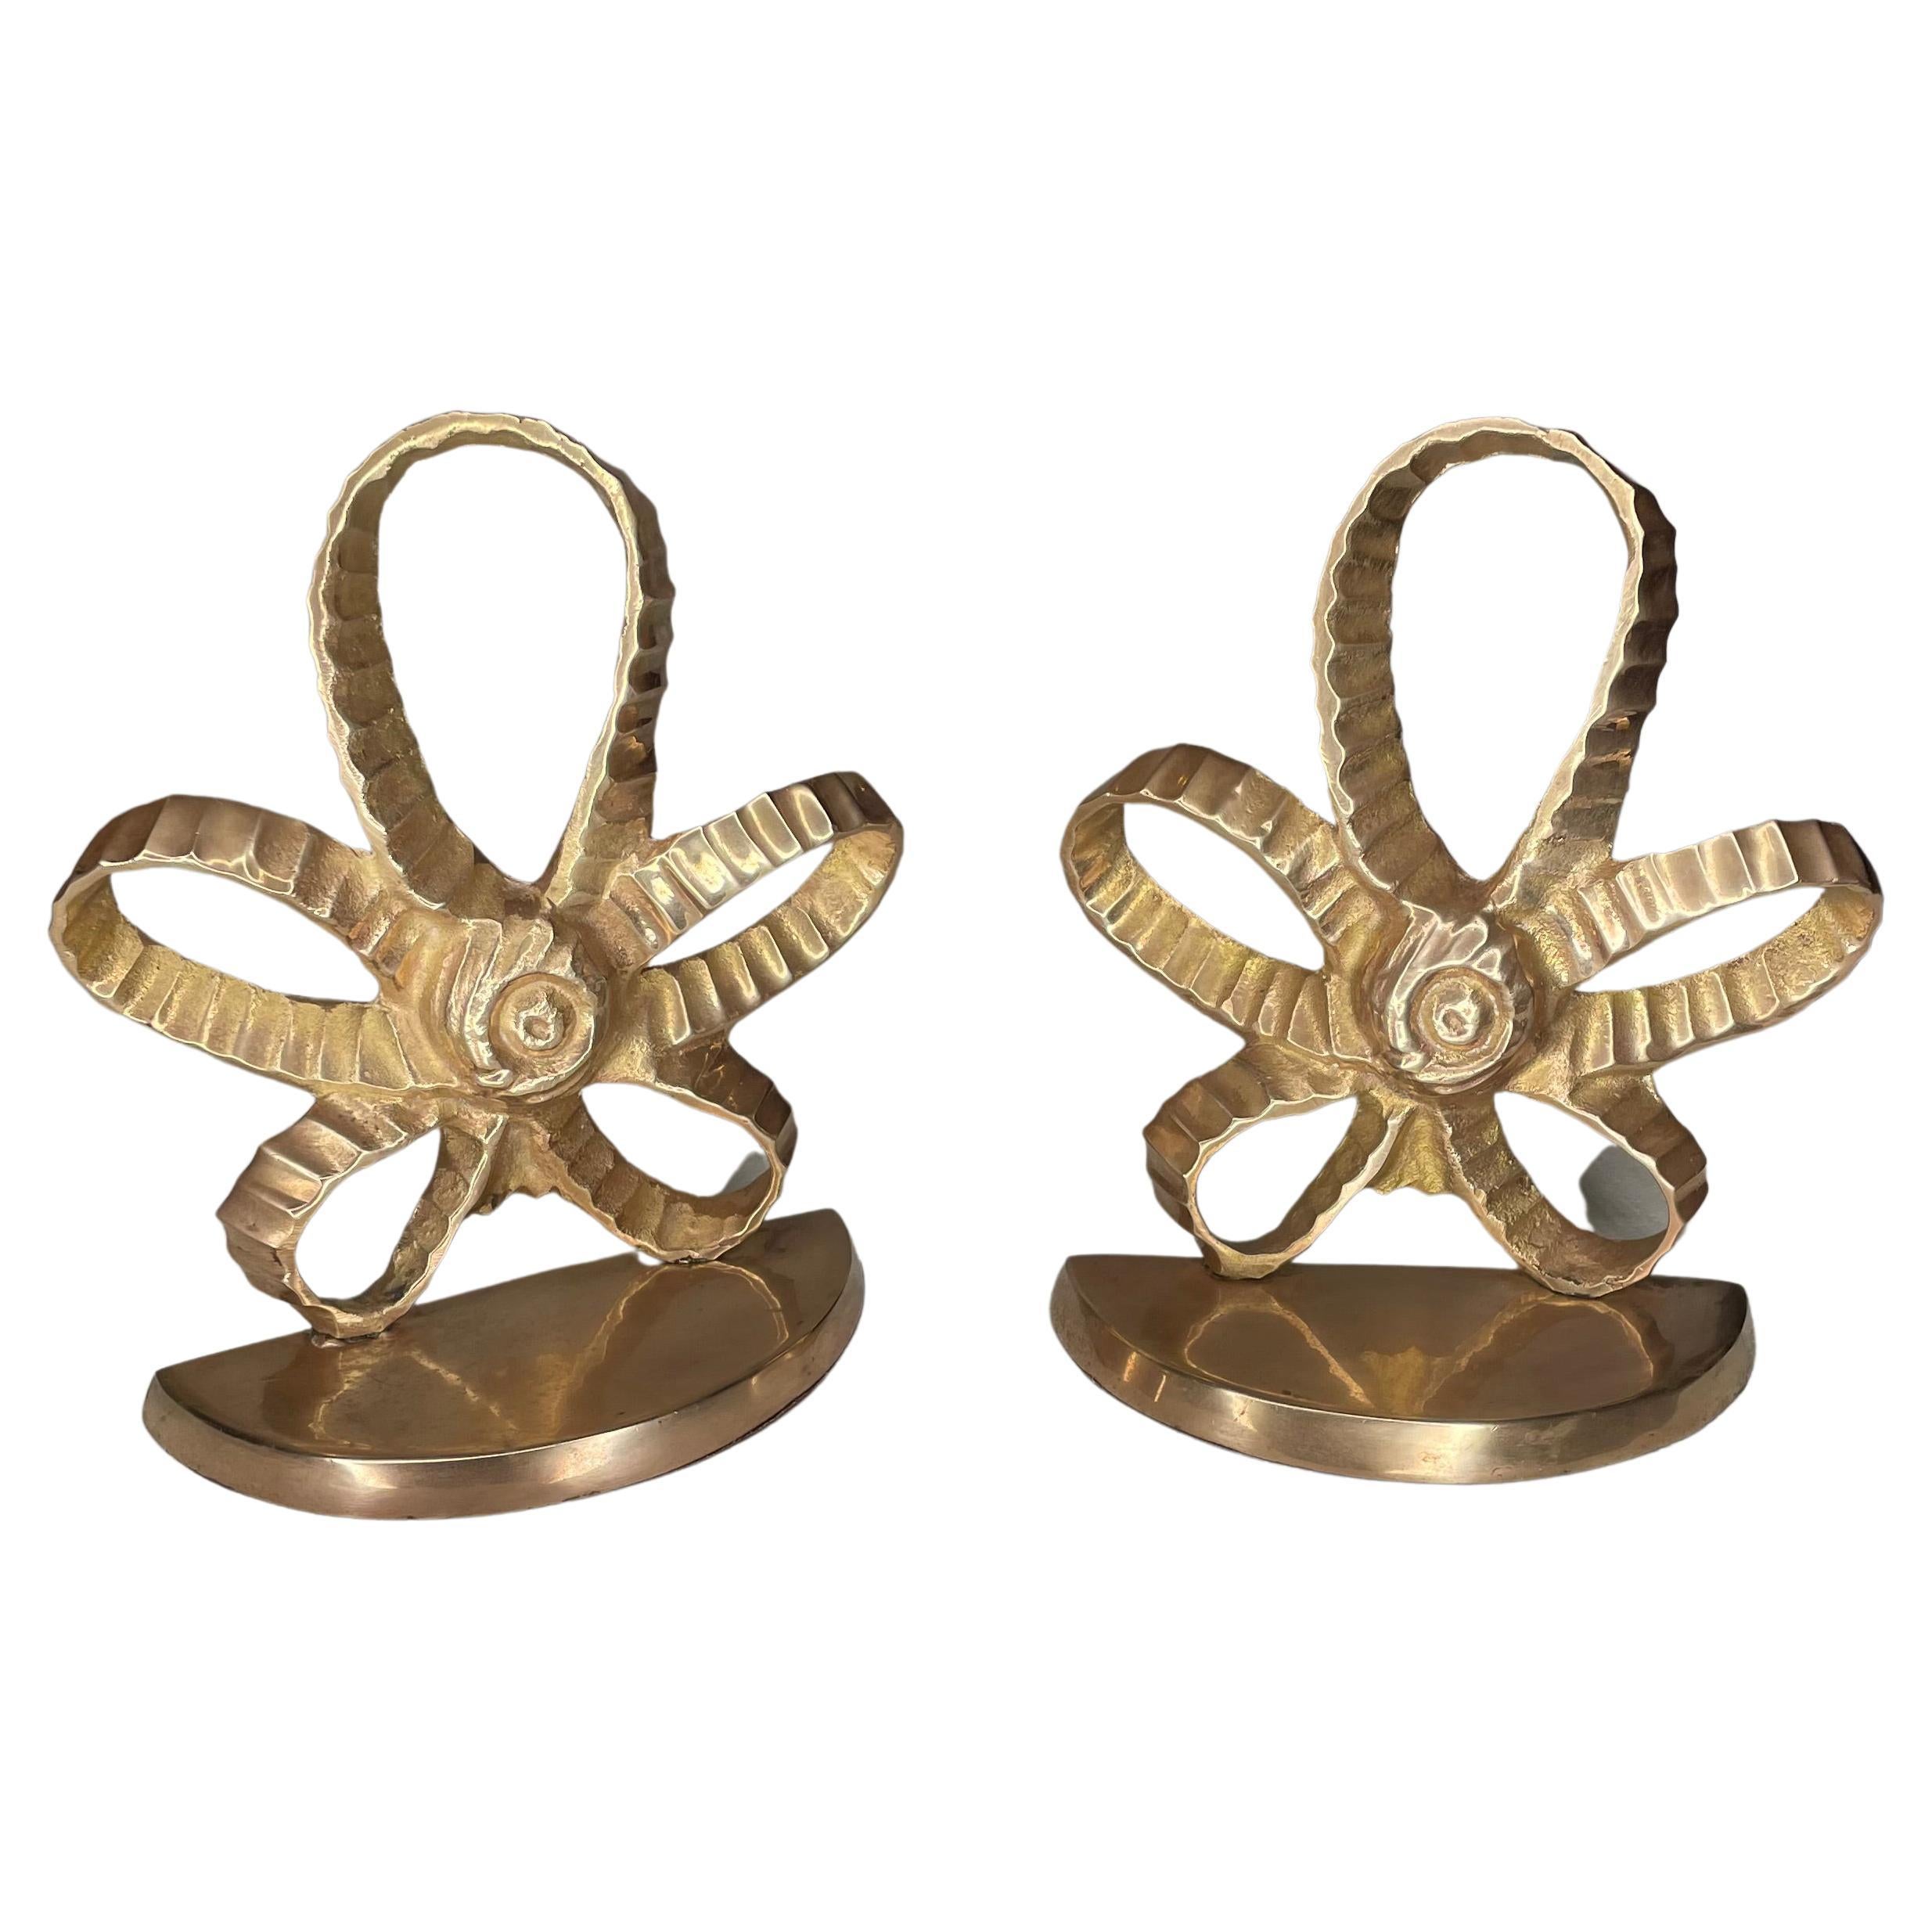 1960s Polished Brass Star Bookends, a Pair For Sale